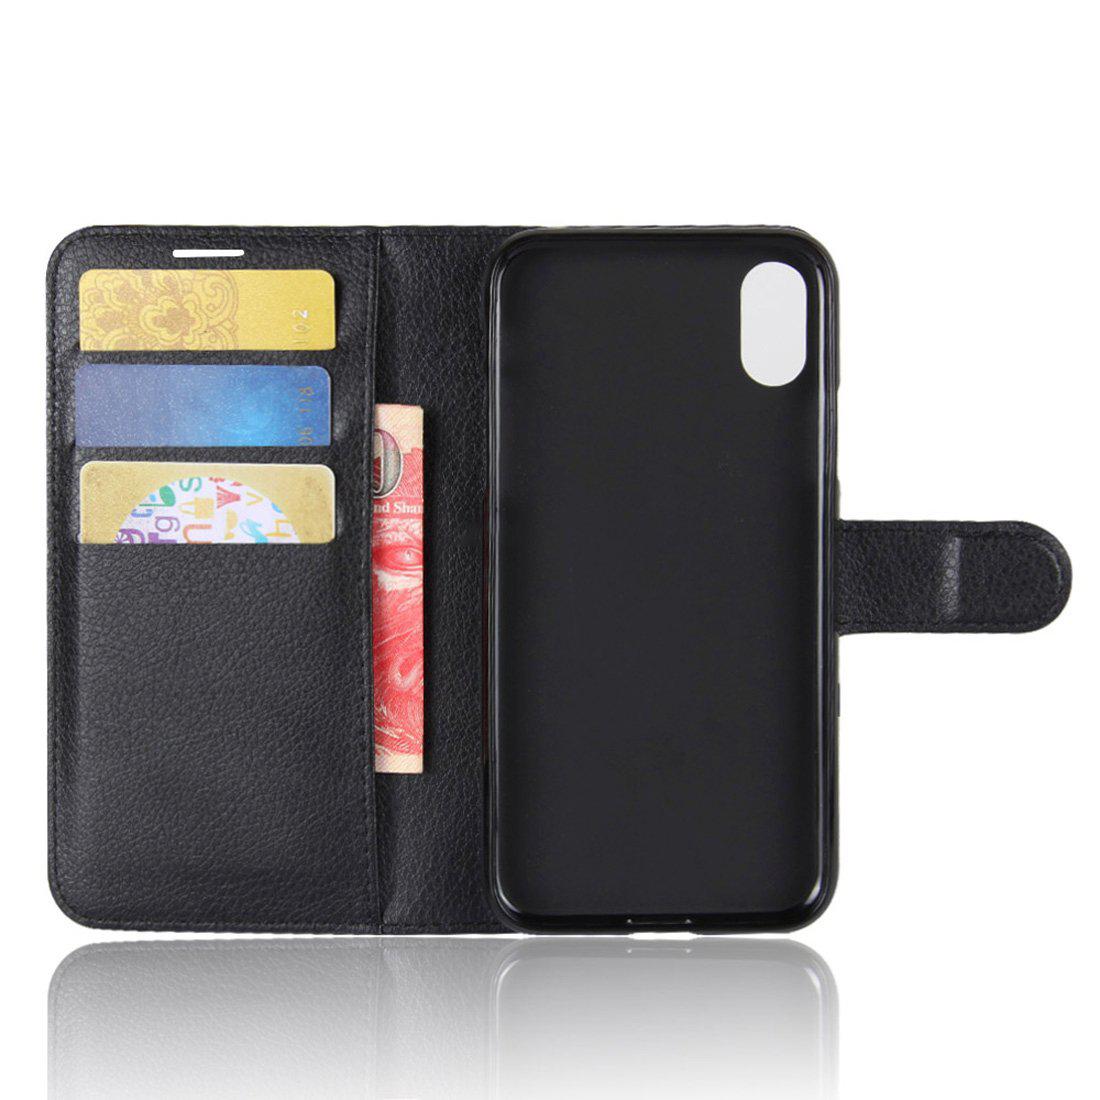 For Apple iPhone X / XS Wallet Case Cover PU Leather Holder Card Slots Black